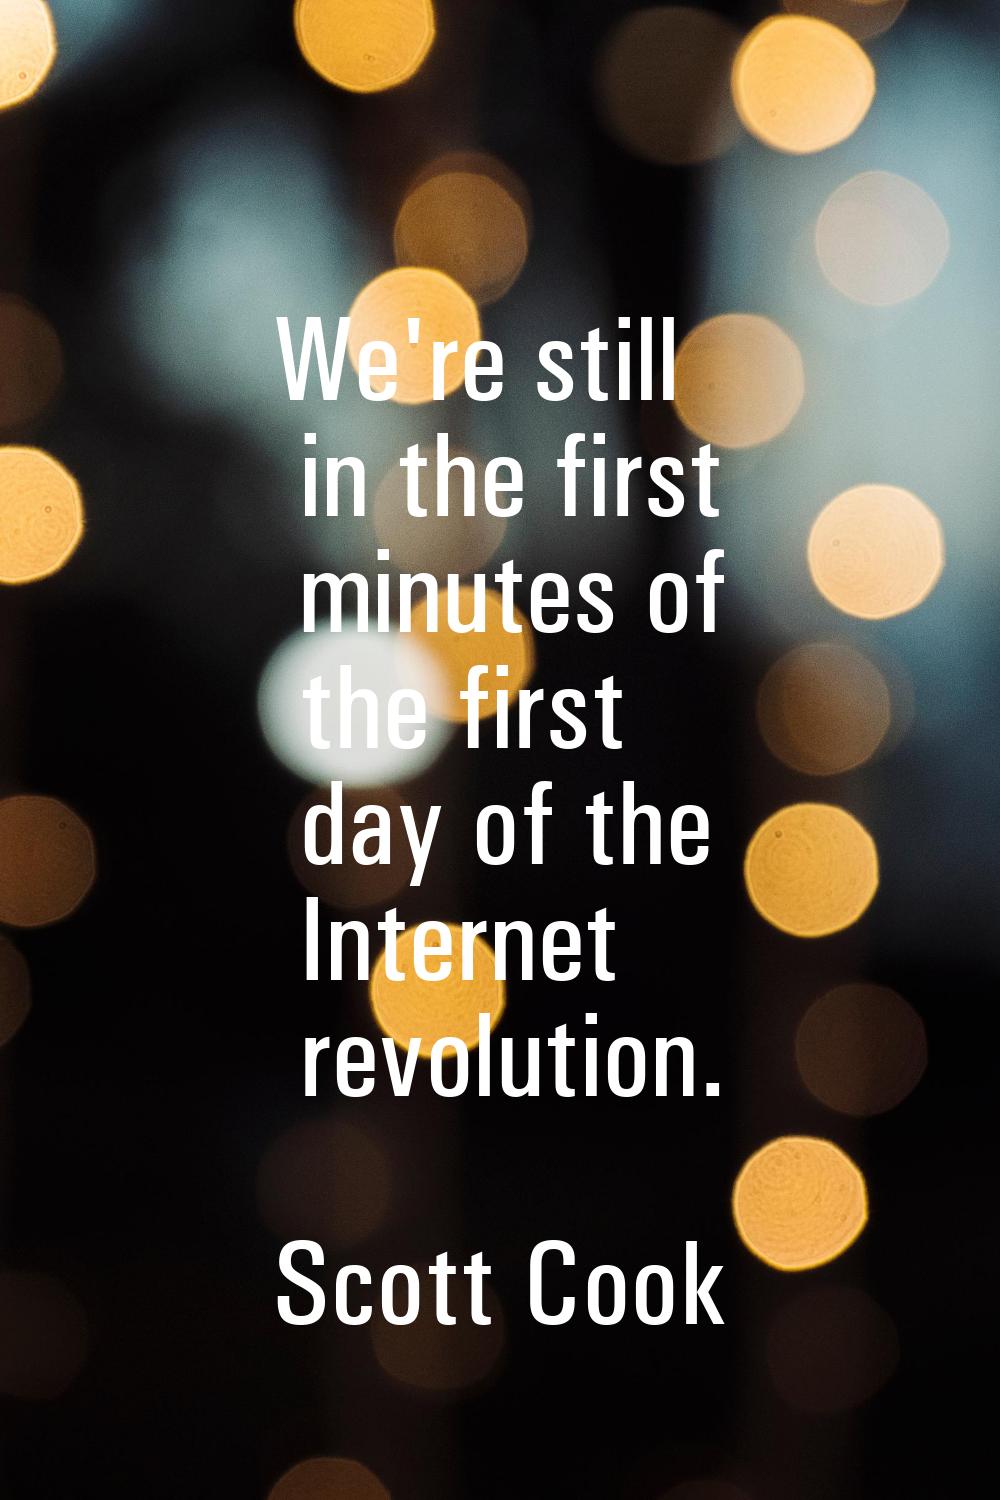 We're still in the first minutes of the first day of the Internet revolution.